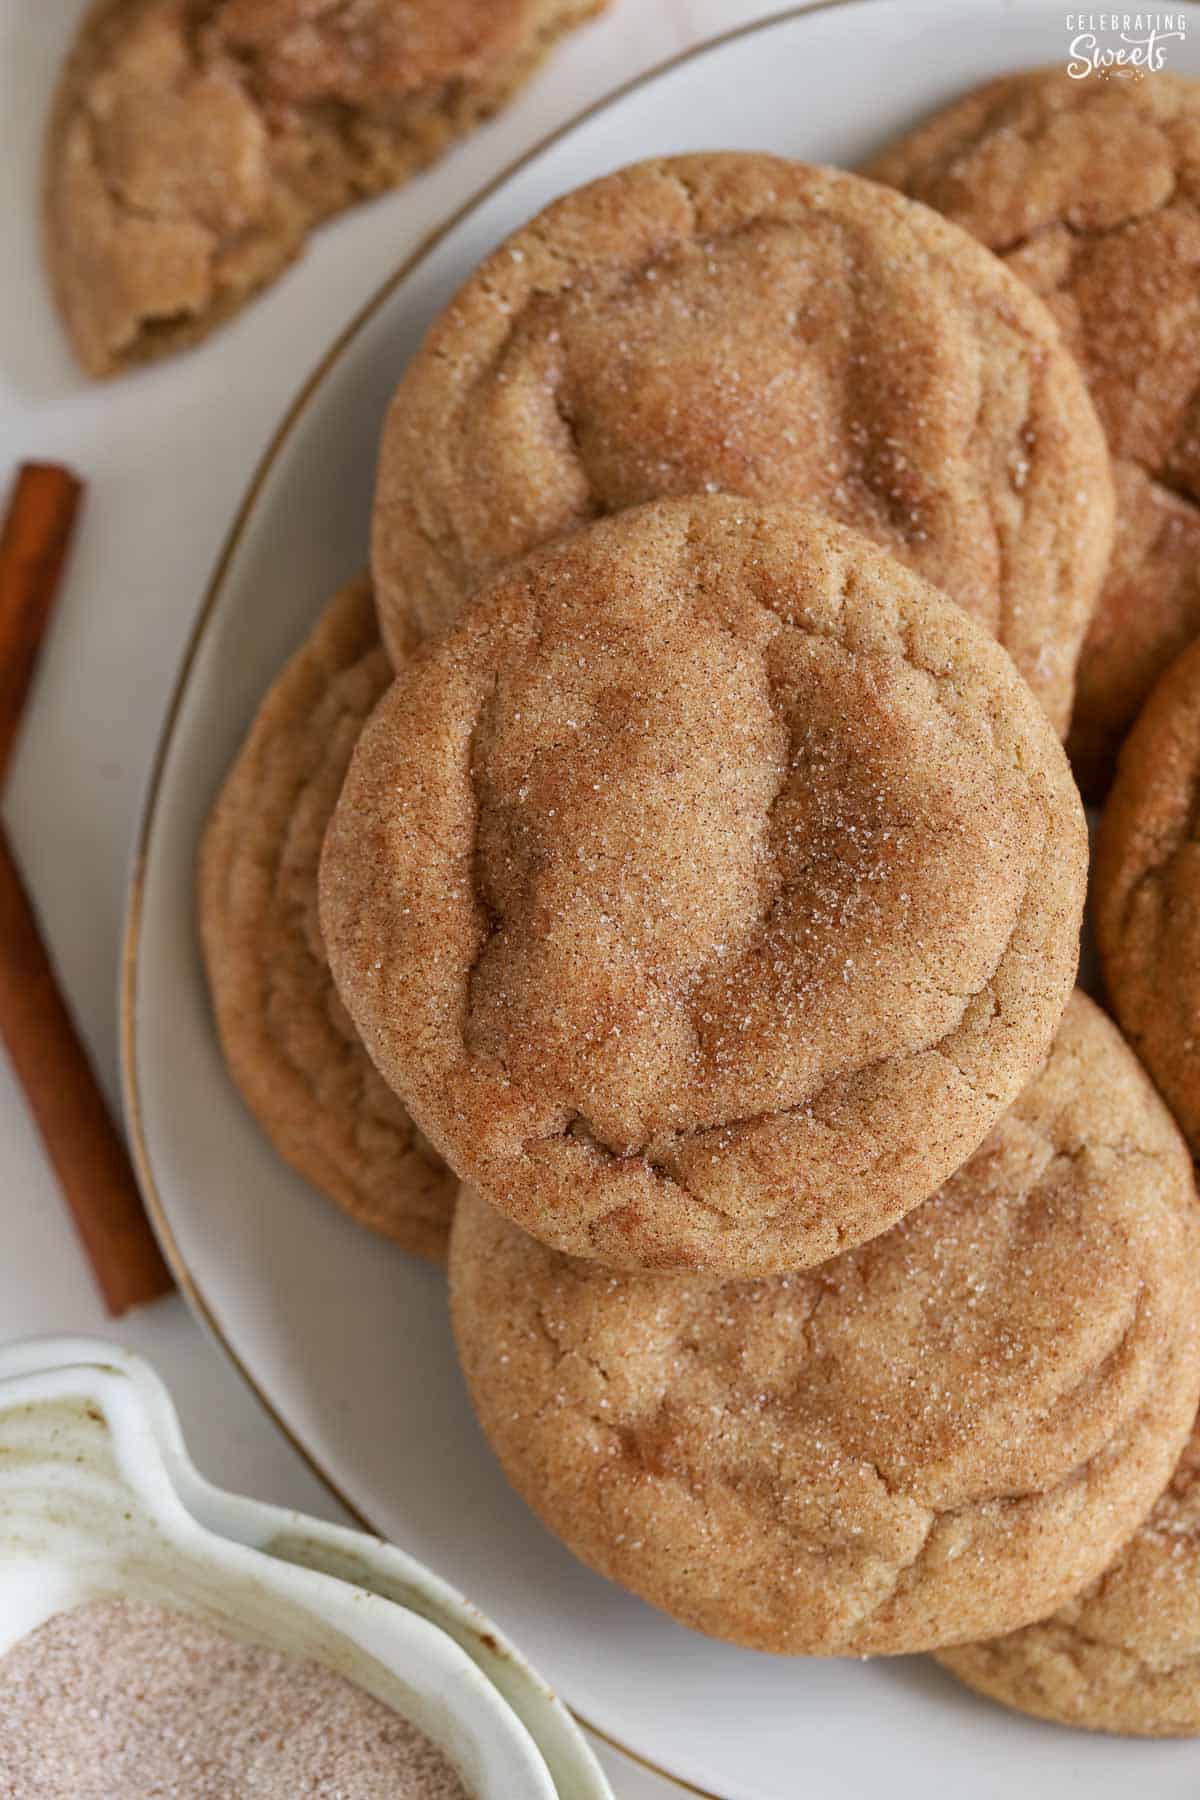 Maple snickerdoodle cookies on a grey plate.